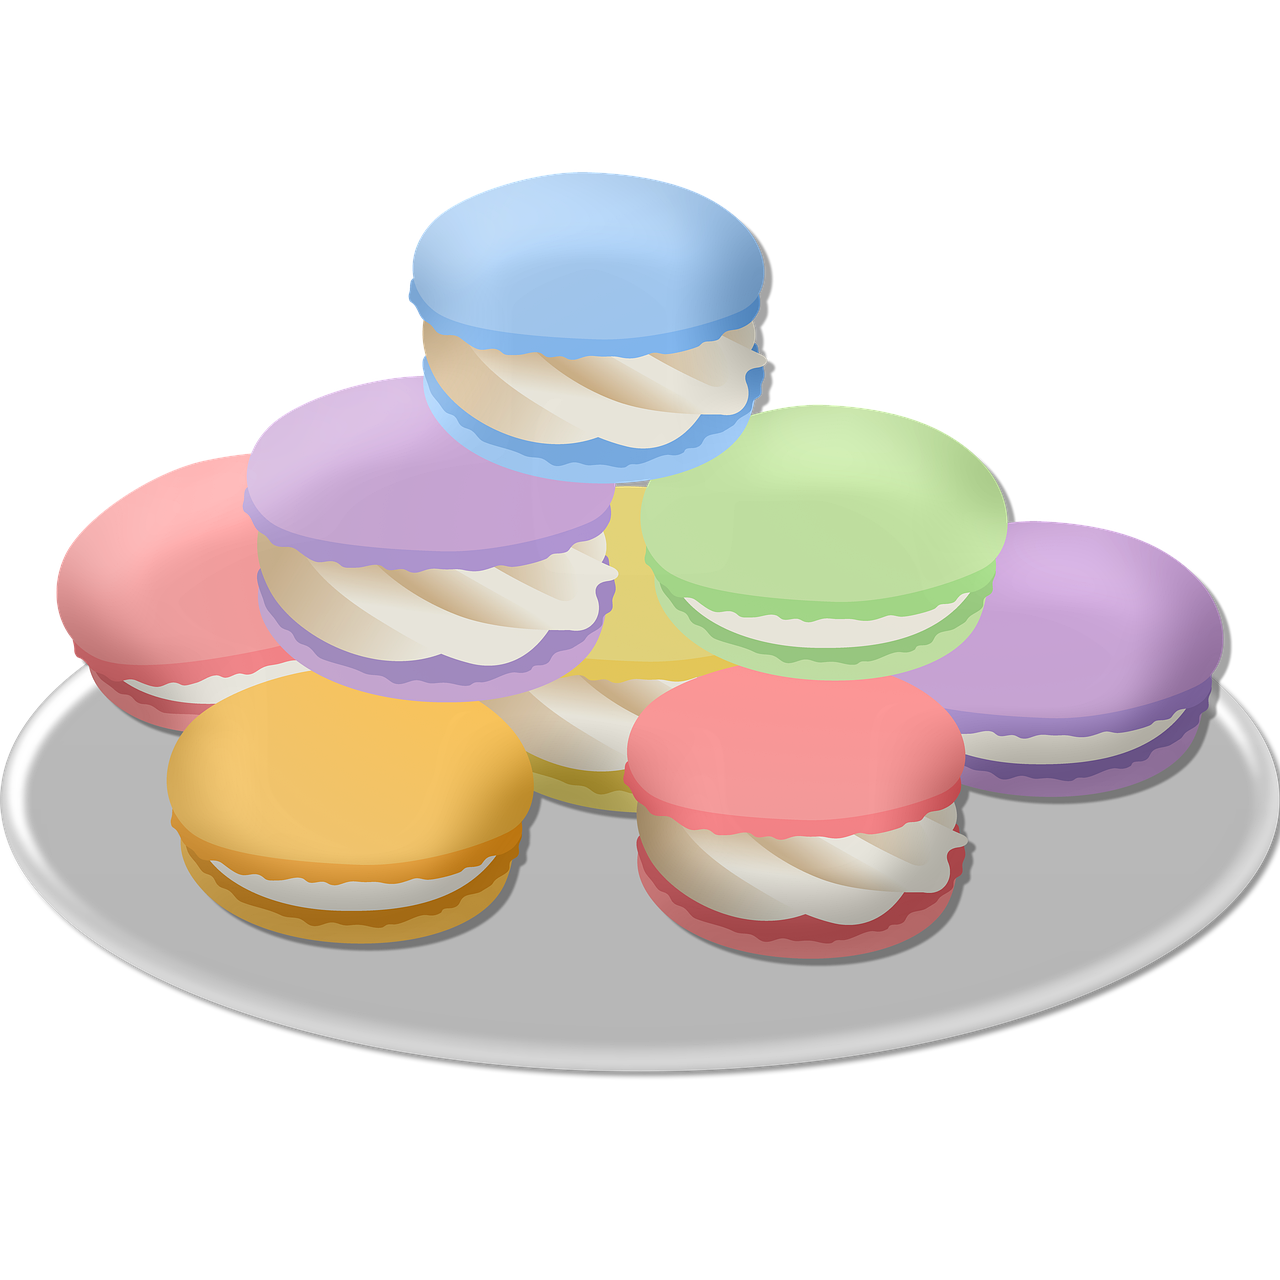 a plate with a bunch of macarons on it, a pastel, inspired by Shūbun Tenshō, sōsaku hanga, wikihow illustration, no gradients, served on a plate, 2 d cg